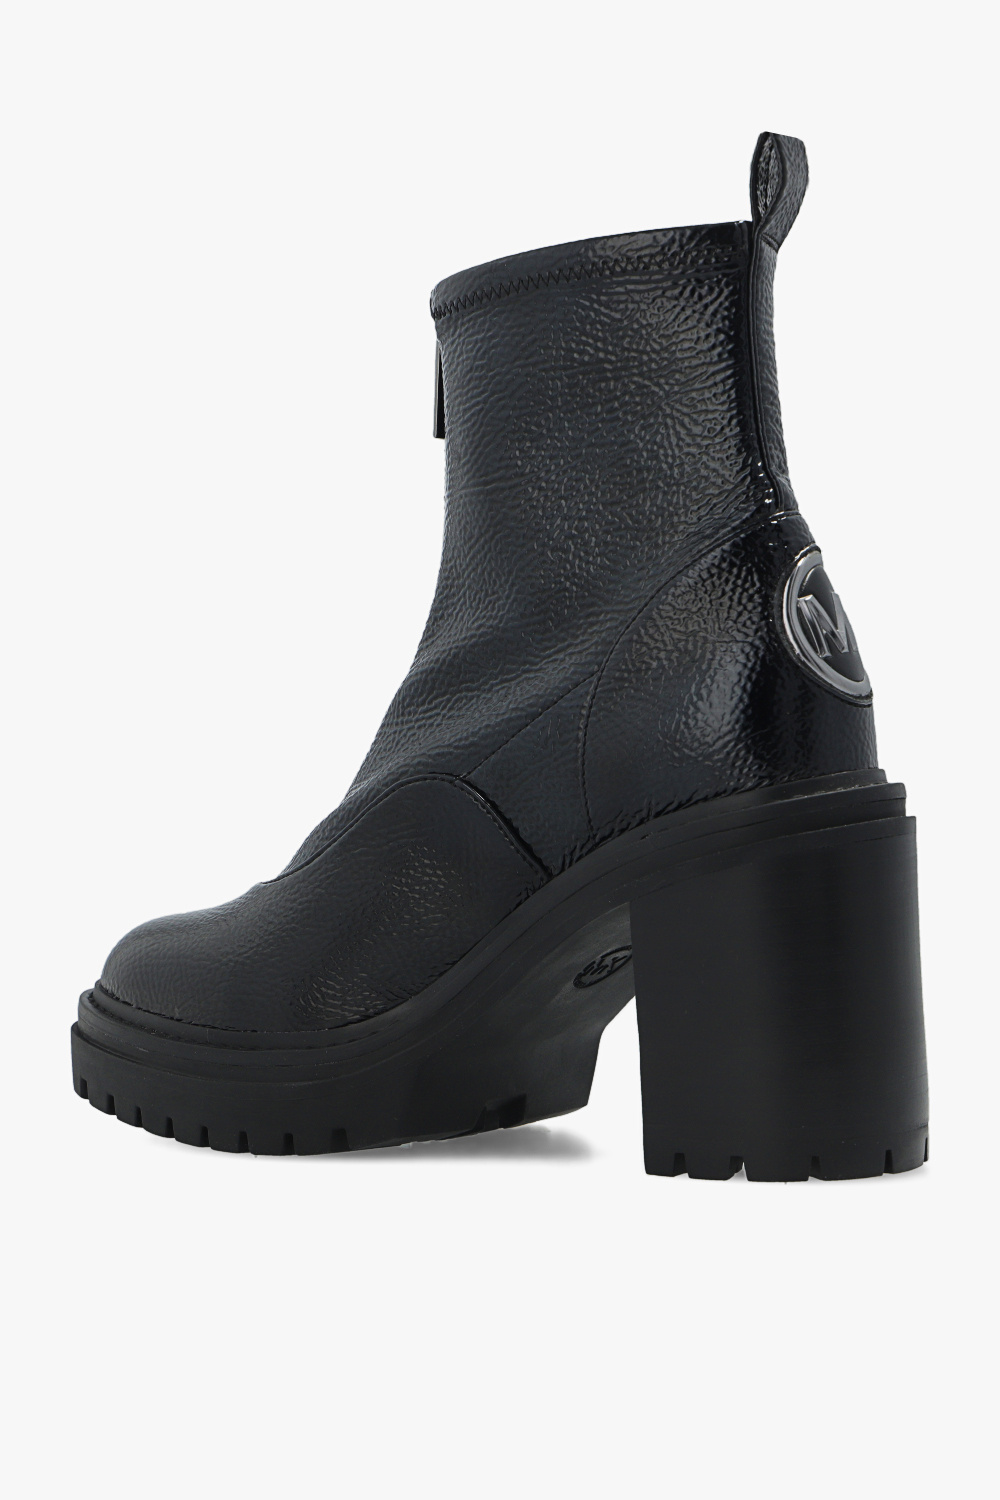 Michael Michael Kors ‘Cyrus’ heeled ankle boots